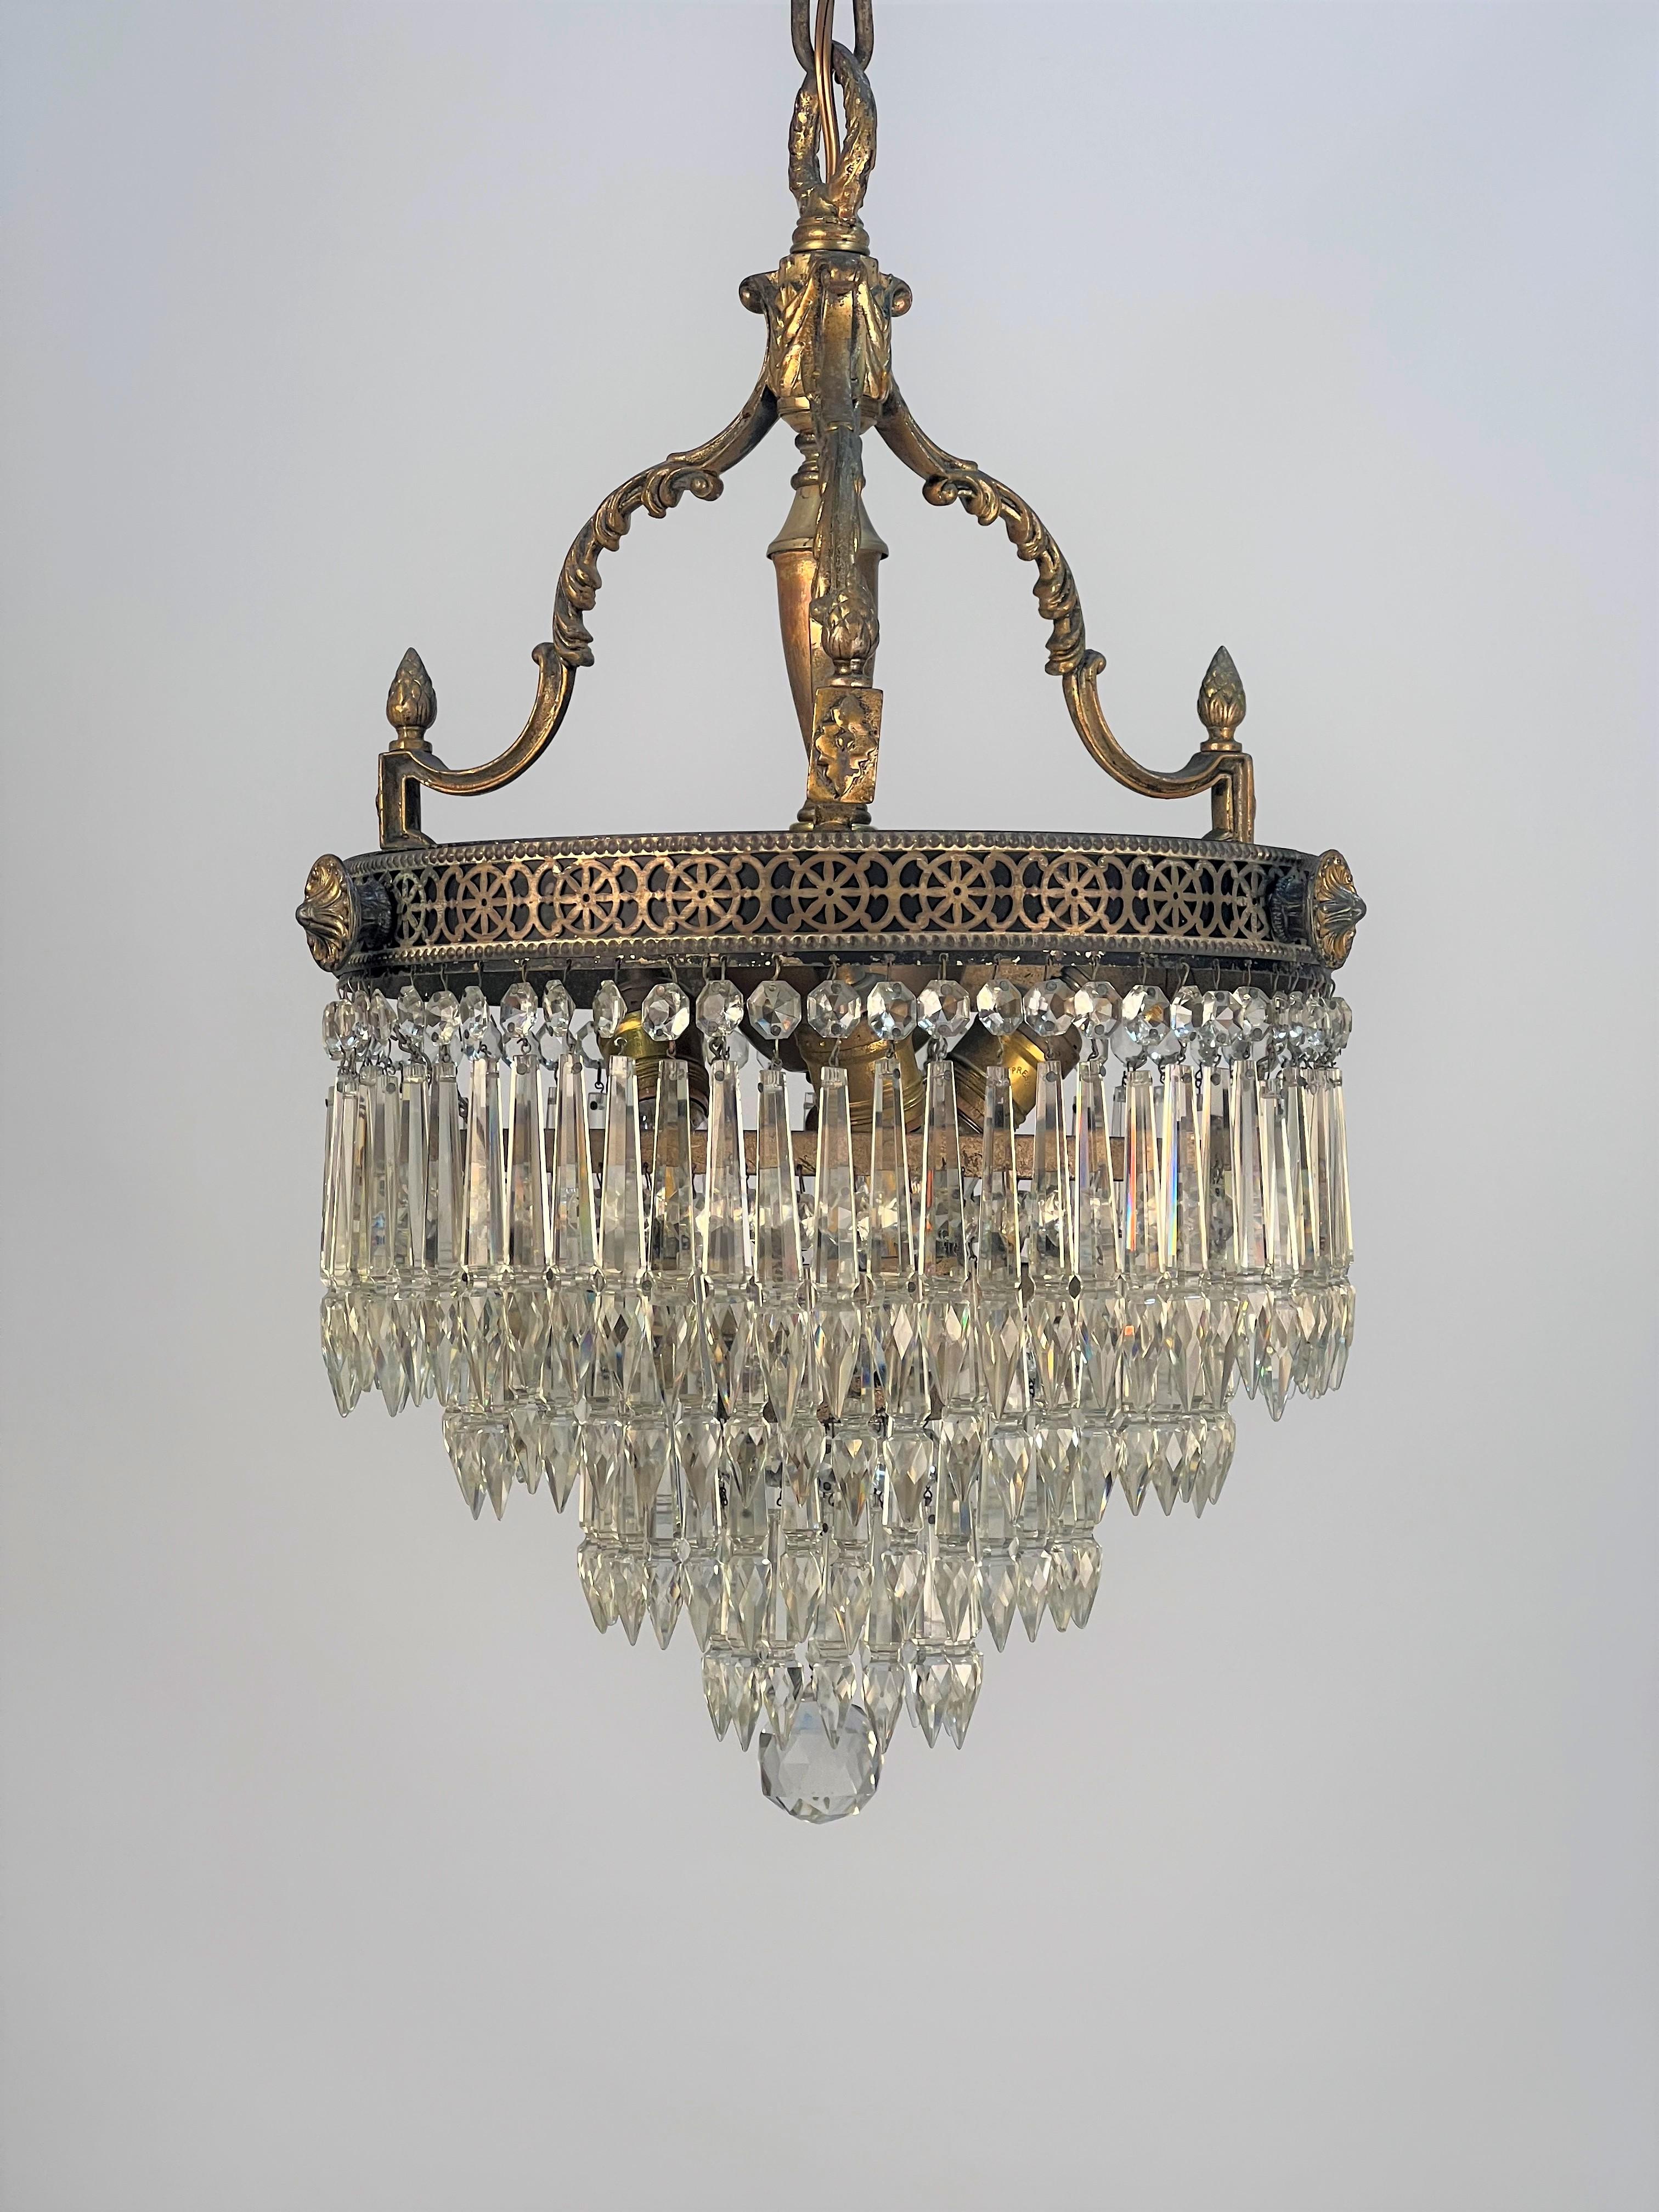 This 1920's chandelier features three cast brass decorative arms with acanthus leaf detail curving down word to a rectangular stop with a turned finial on top. The stop appears to be attached to a central reticulated (pierced) brass gallery applied